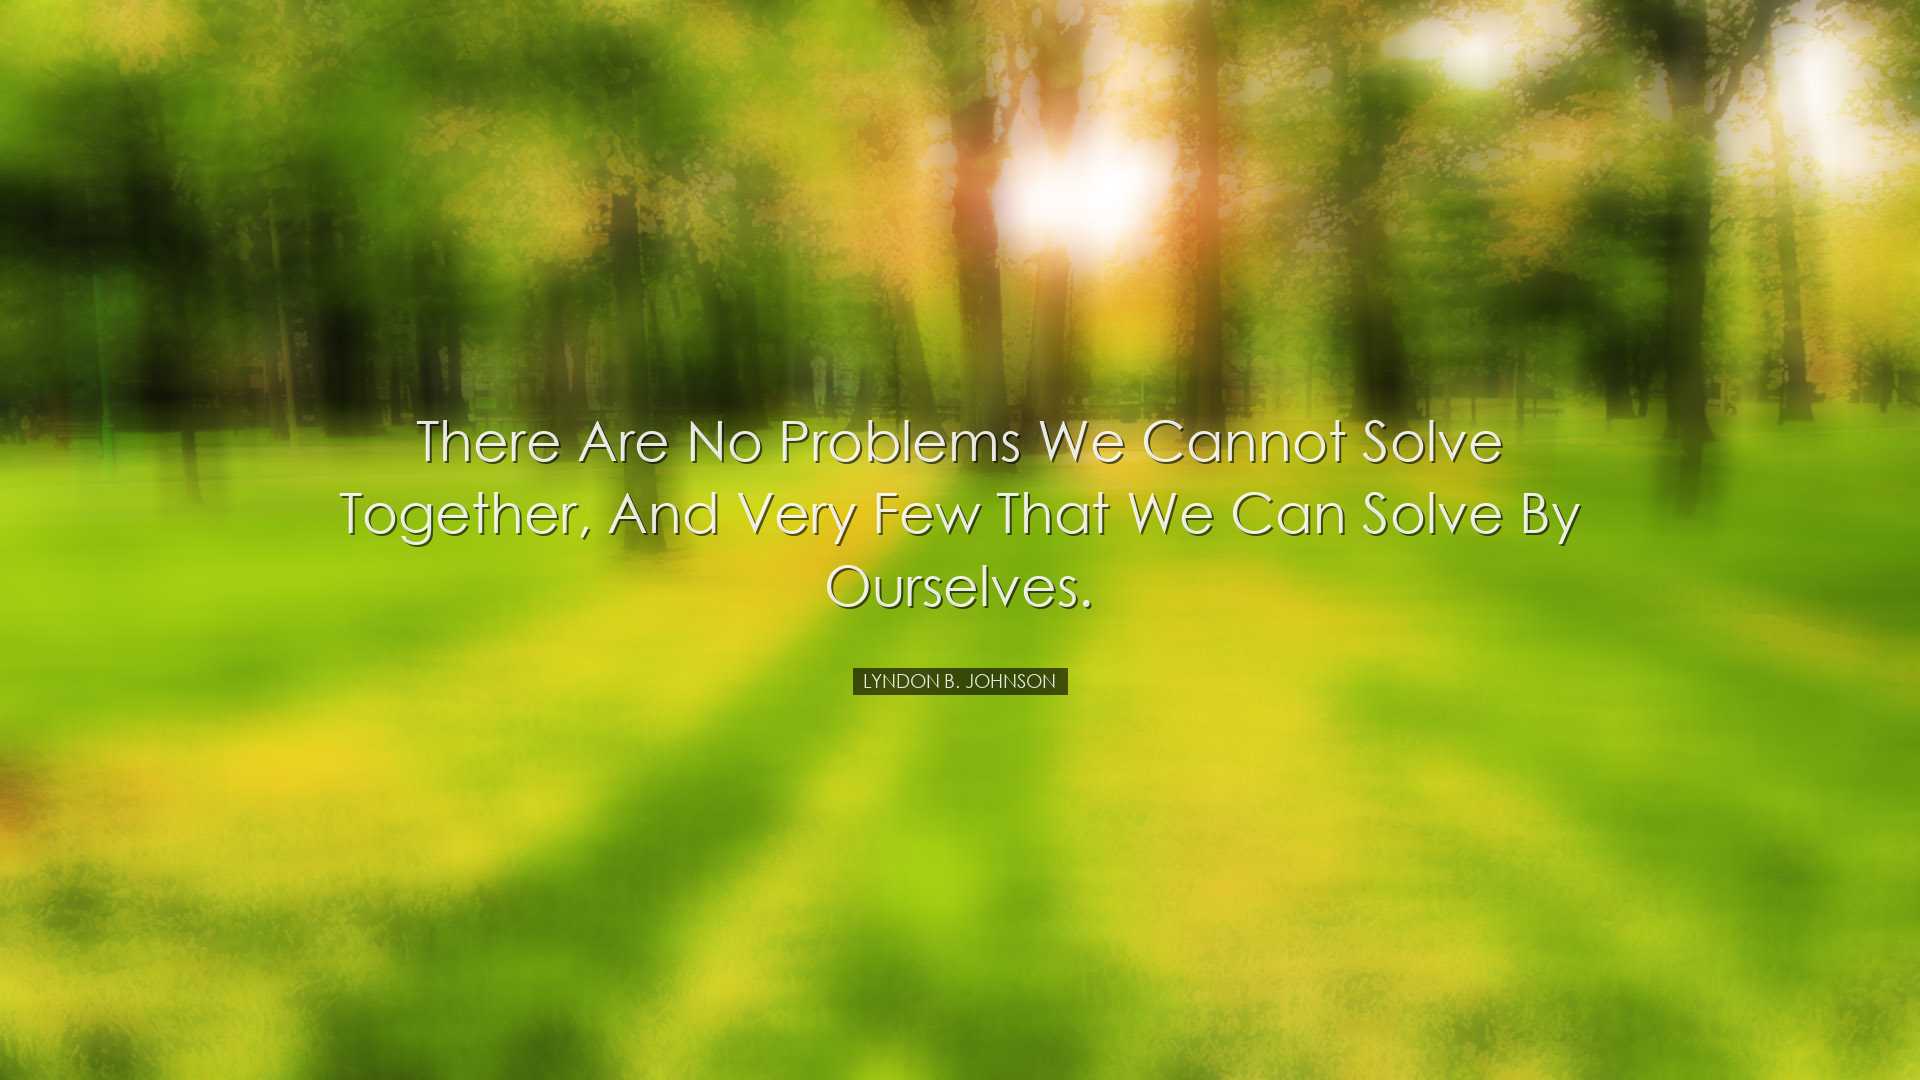 There are no problems we cannot solve together, and very few that